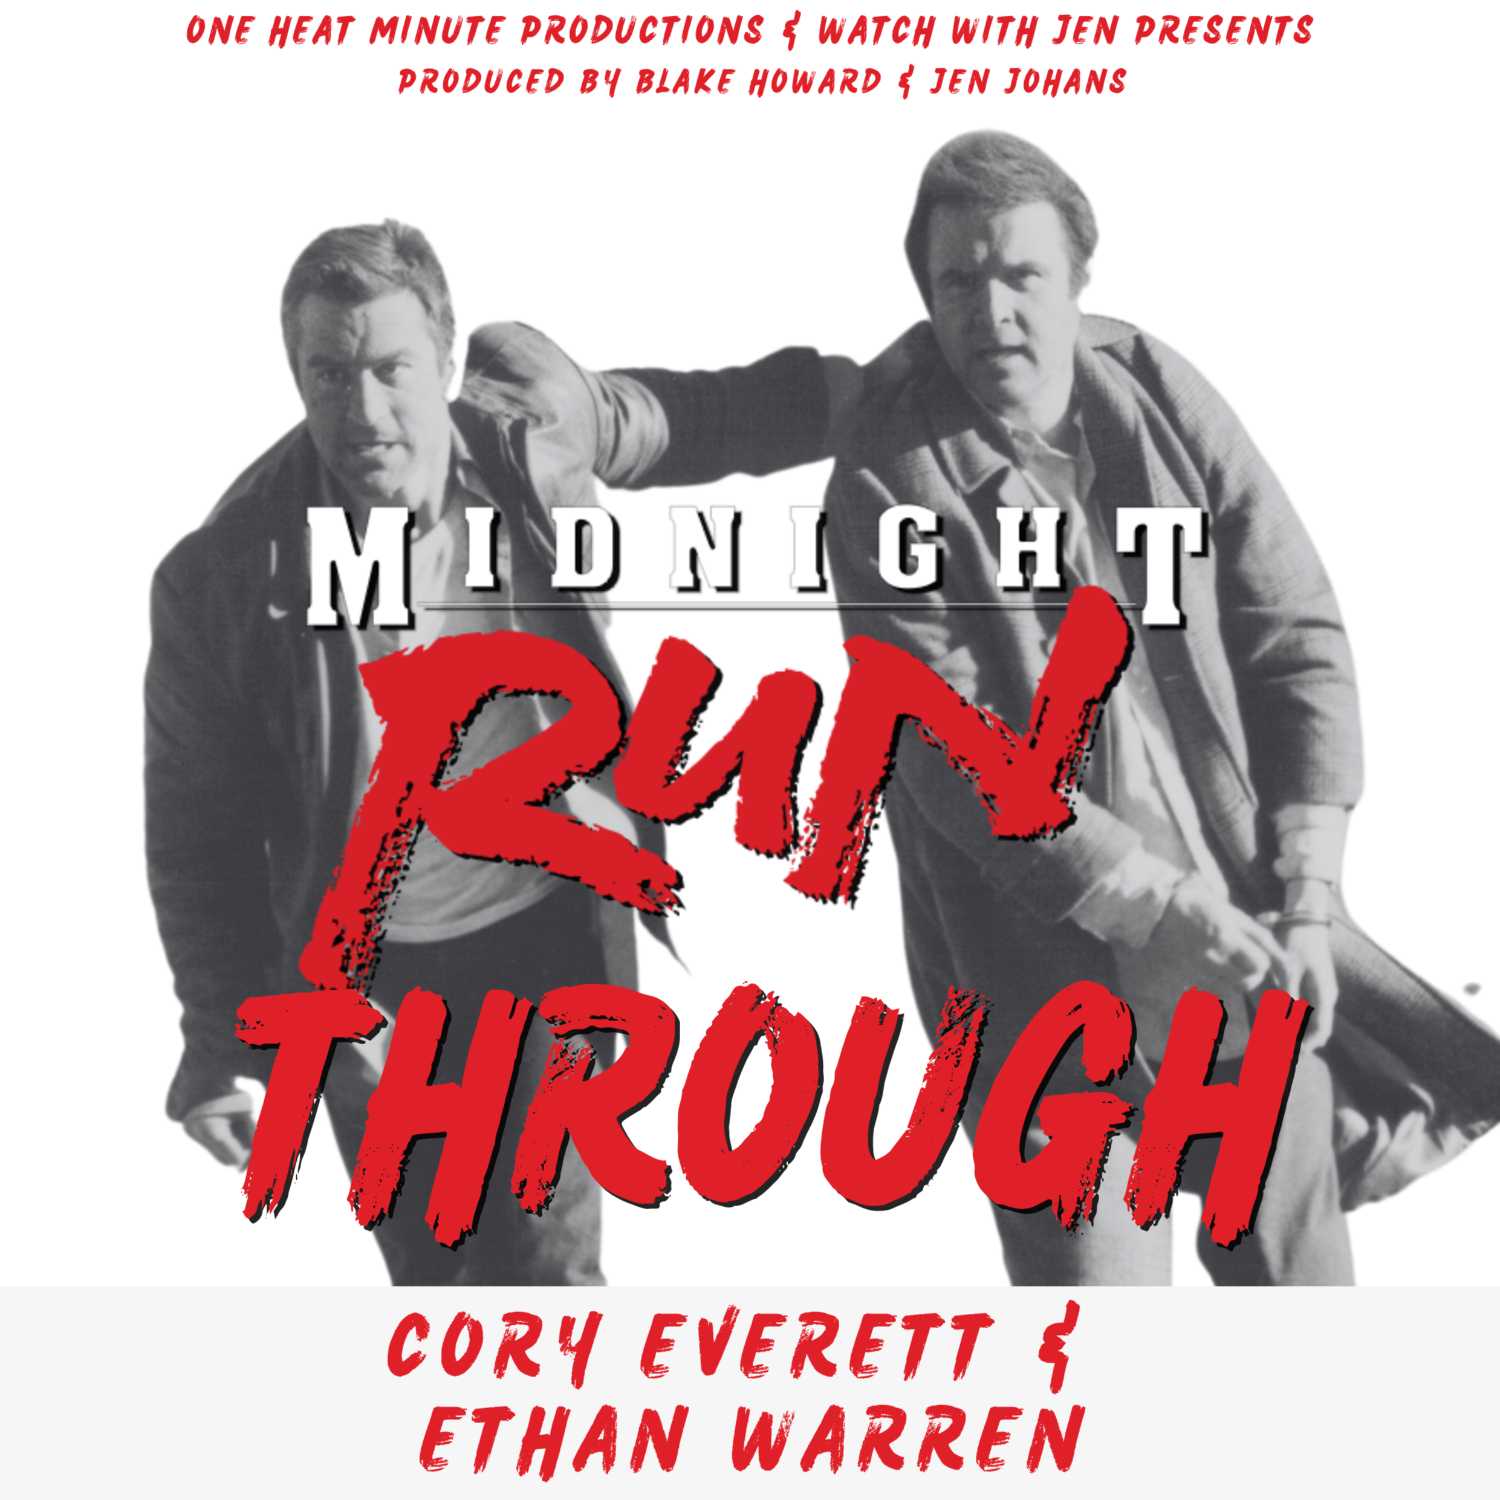 MIDNIGHT RUN-THROUGH - Episode 5 with Cory Everett & Ethan Warren (From One Heat Minute Productions & Watch With Jen)